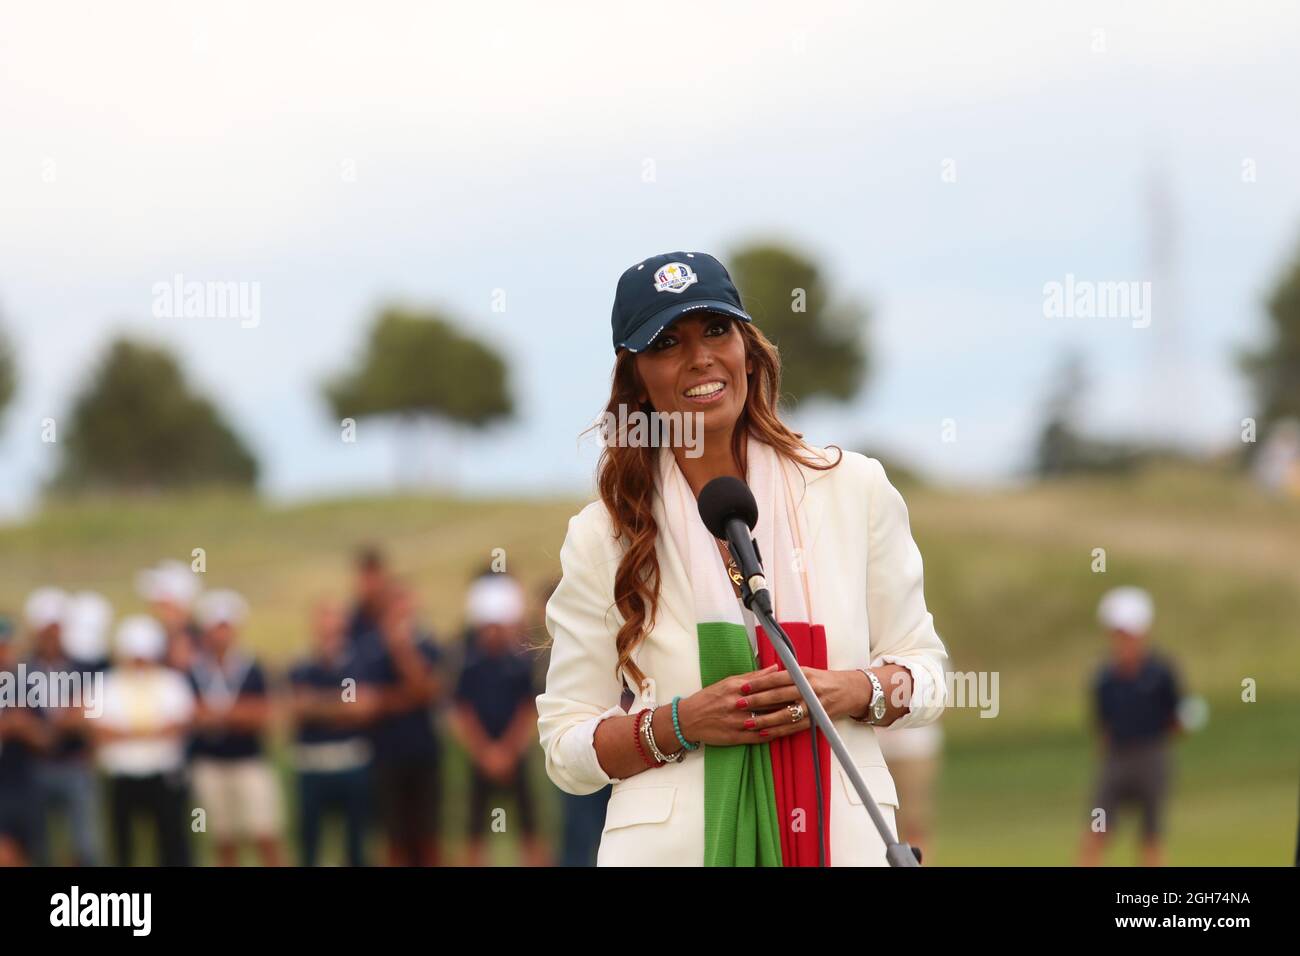 LAVINIA BIAGIOTTI DURING THE 2 ROUND OF THE DS AUTOMOBILES 78TH ITALIAN GOLF OPEN AT MARCO SIMONE GOLF CLUB ON SEPTEMBER 05, 2021 IN ROME ITALY Stock Photo